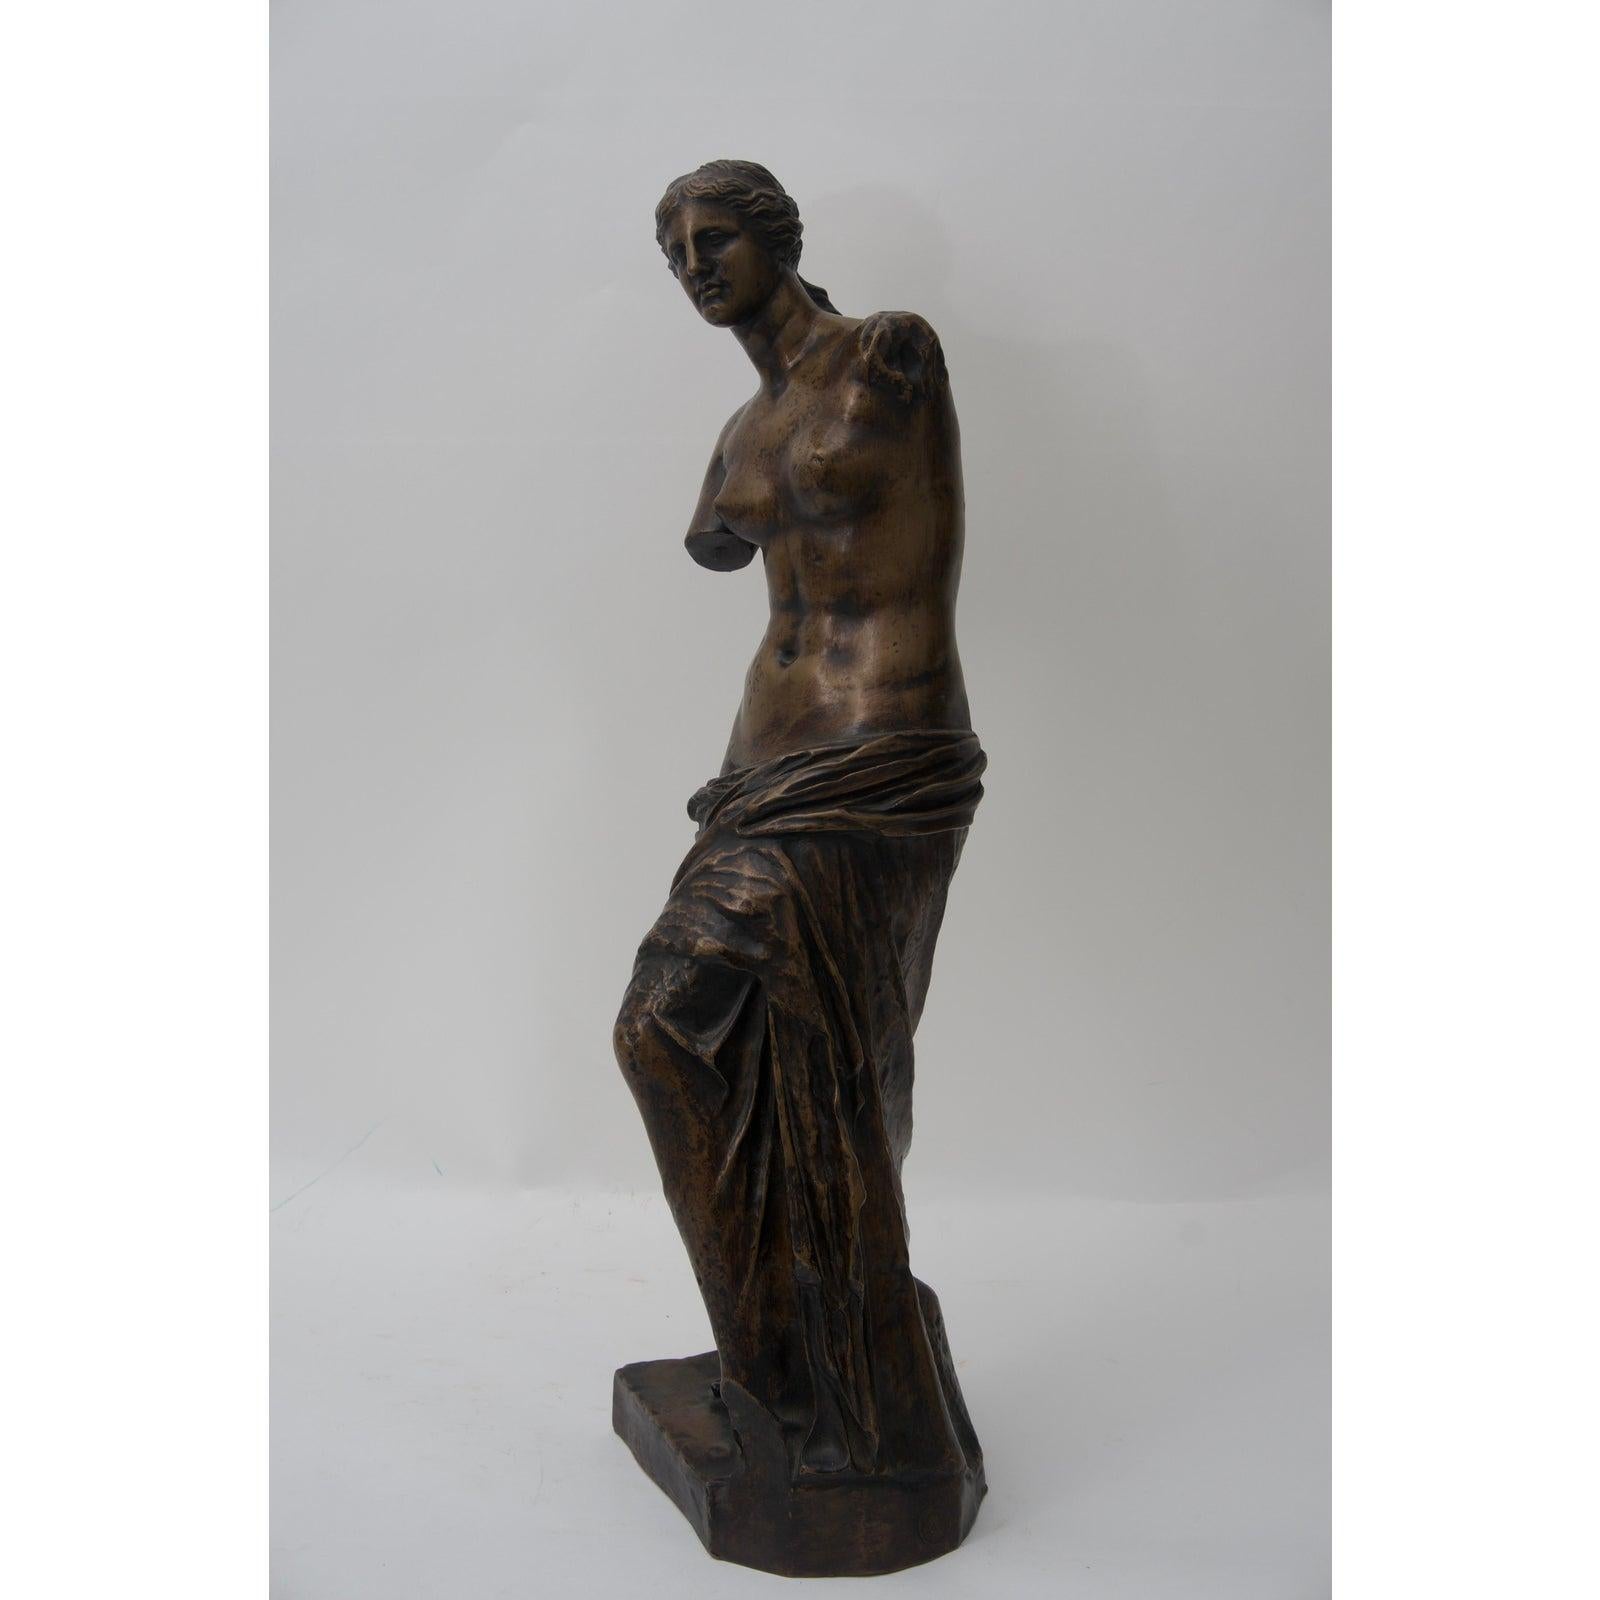 This cast bronze sculpture of the Venus de Milo dates to the 1860s-1880s and was cast by the F. Barbedinne foundry in Paris started in 1838 by Ferdinand Barbedienne and Achille Collas .  

Note: The piece is marked on the base (see last photo).



